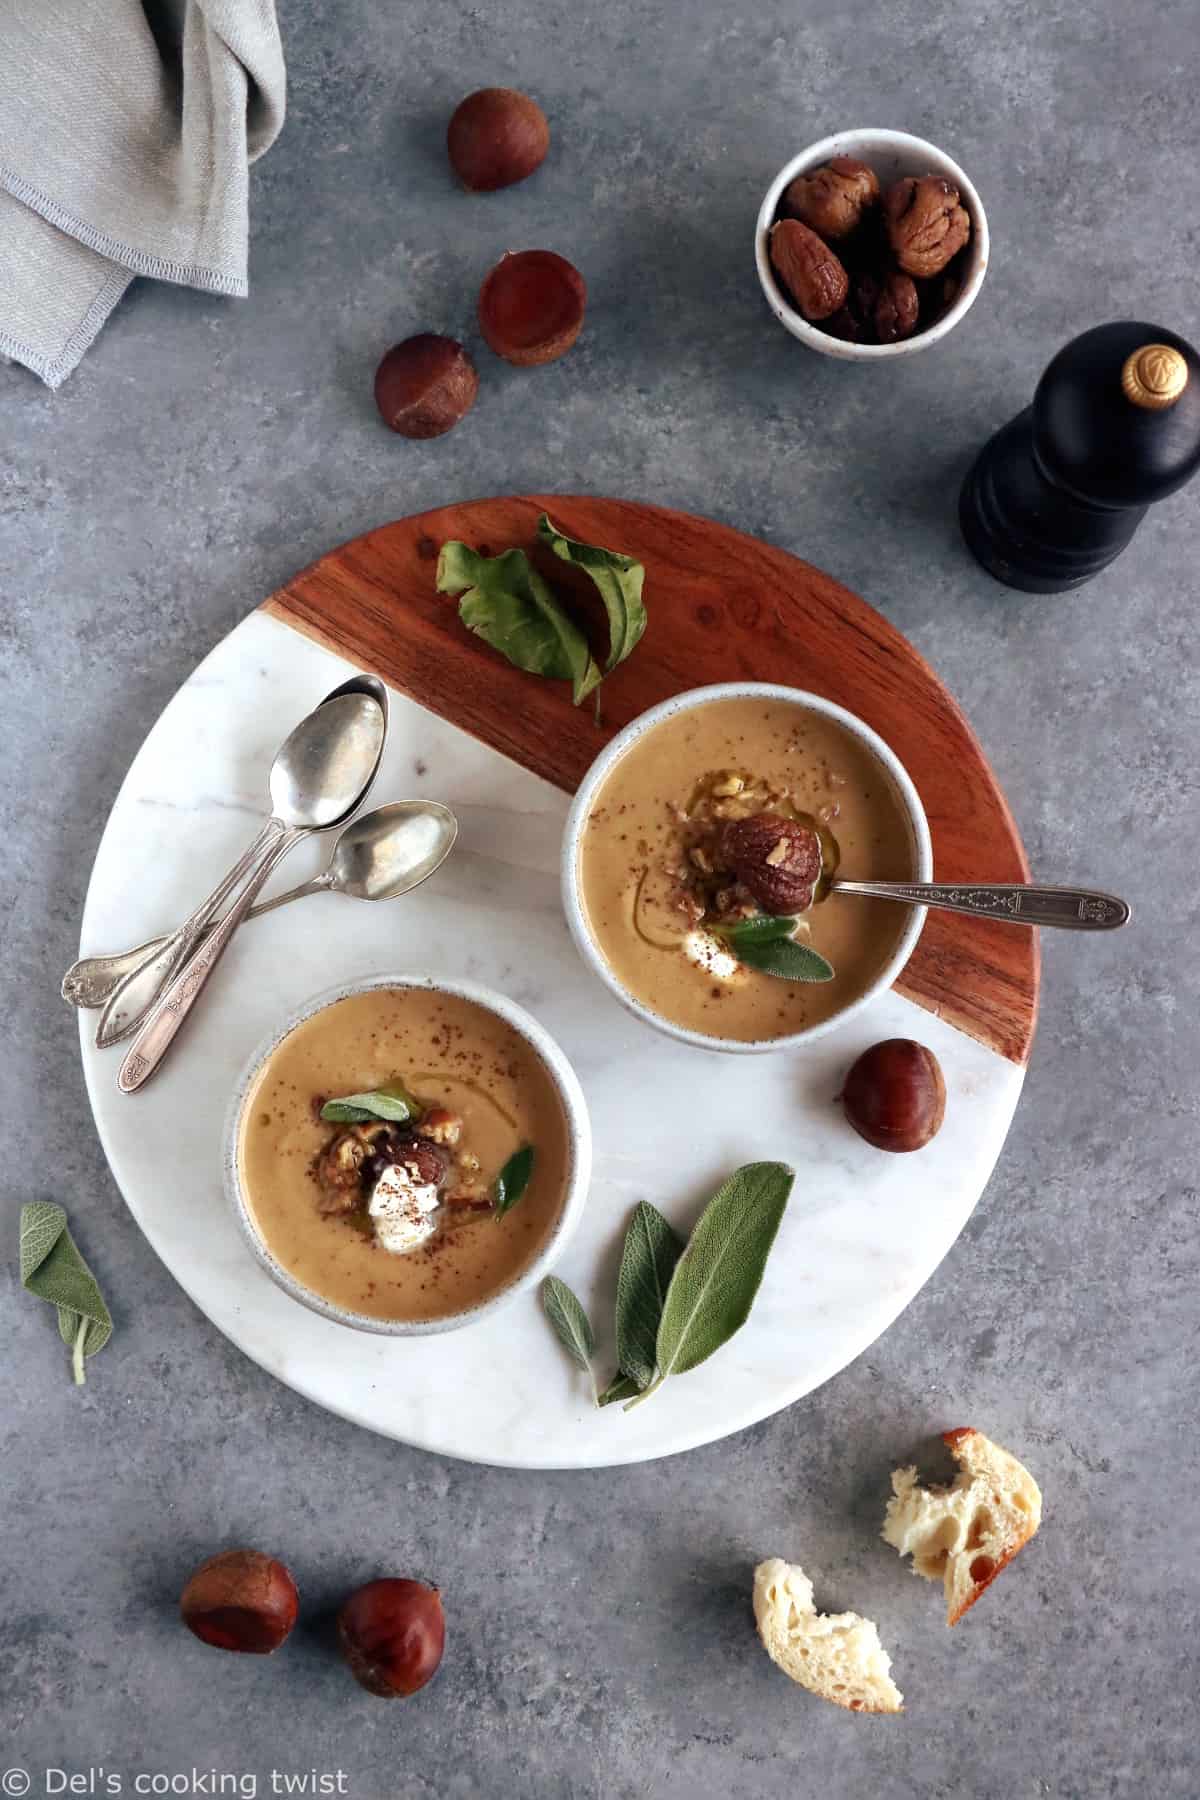 With its earthy flavors and strong herbal aroma, this chestnut soup with sage makes the most delicious starter to a subtle meal.